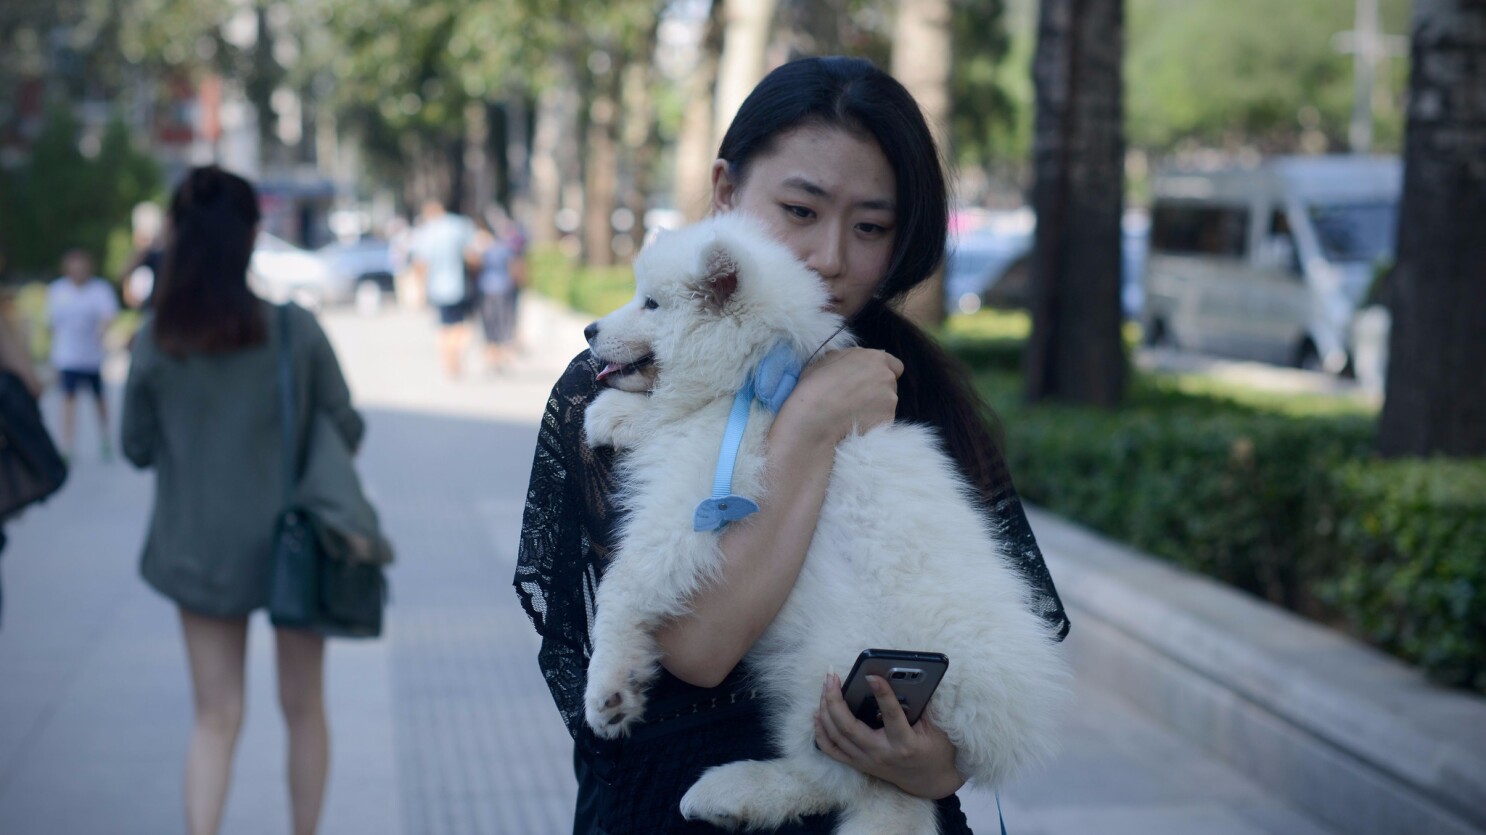 In China, some people eat dogs; others have them as pets. Now an upcoming  dog show is causing controversy - Los Angeles Times